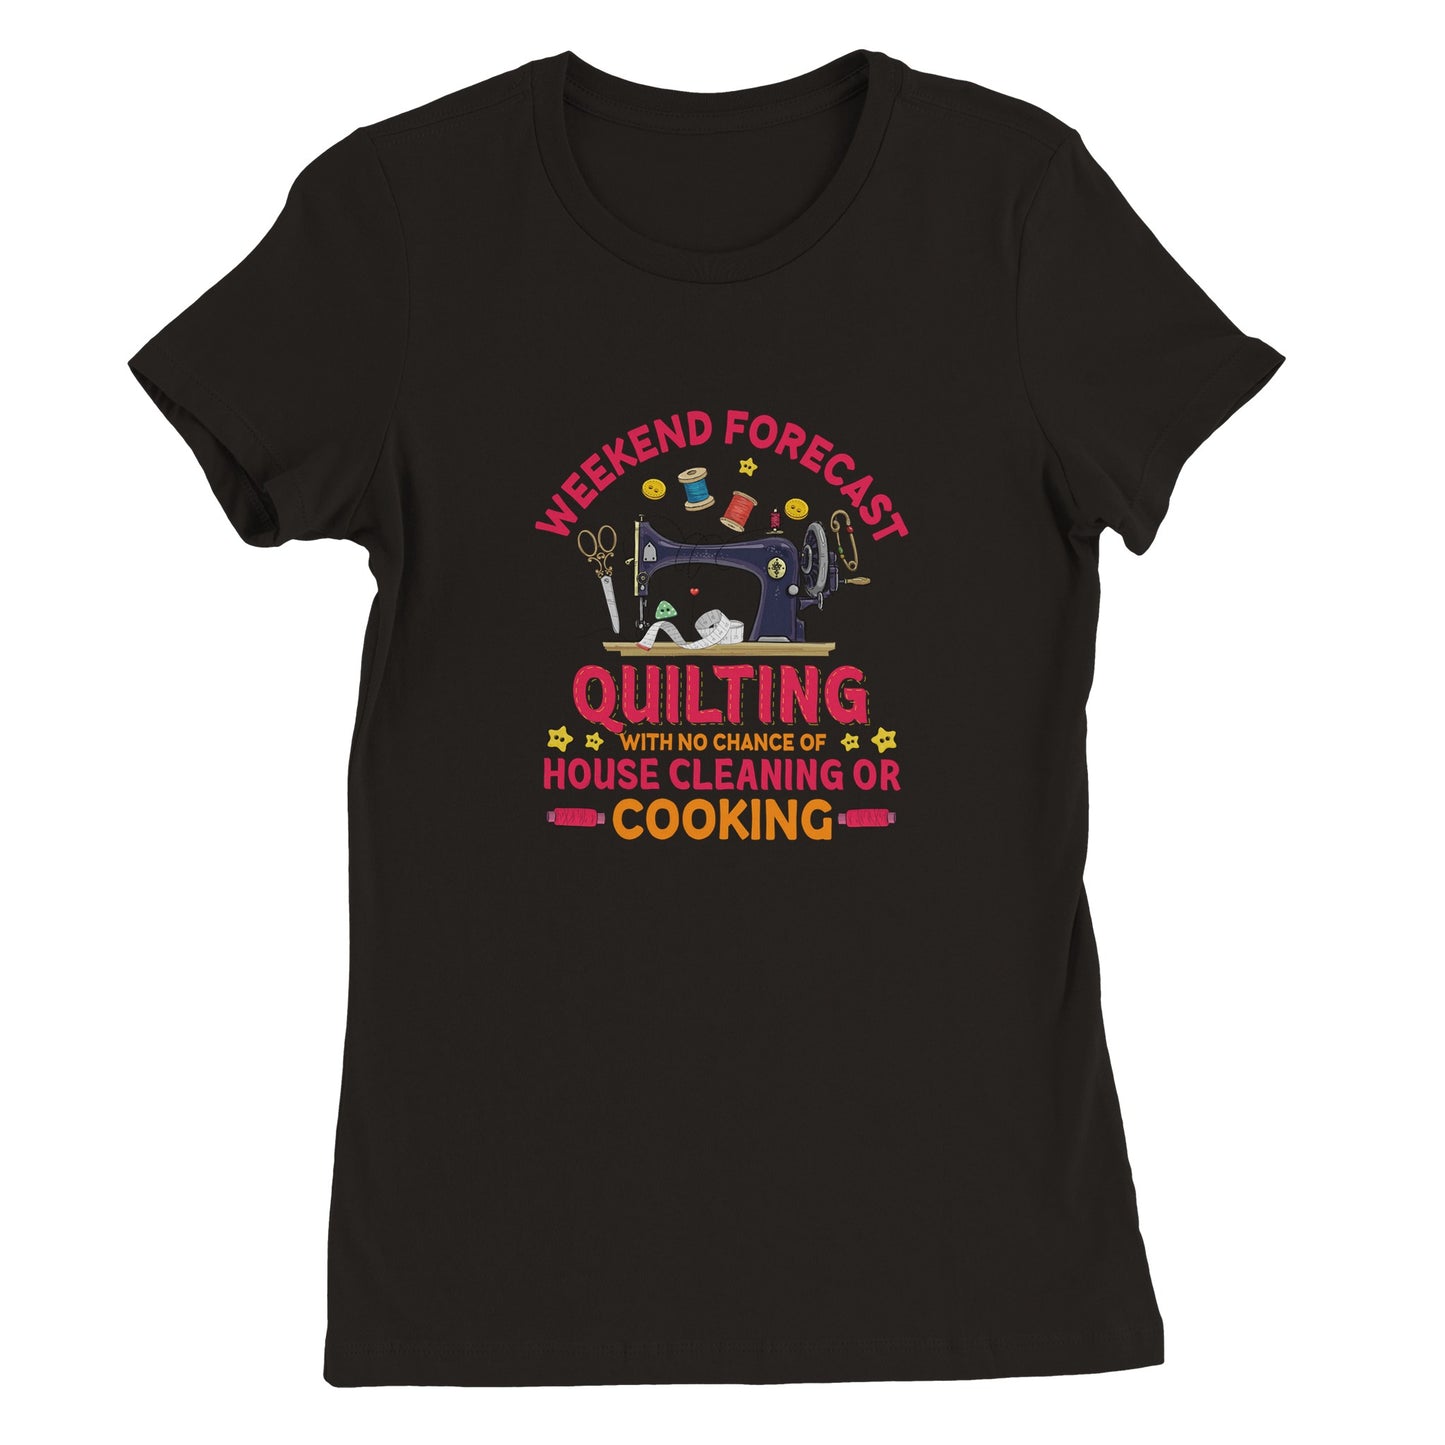 Weekend Forecast Quilting with No Change of House Cleaning or Cooking - Premium Women's Crewneck T-shirt